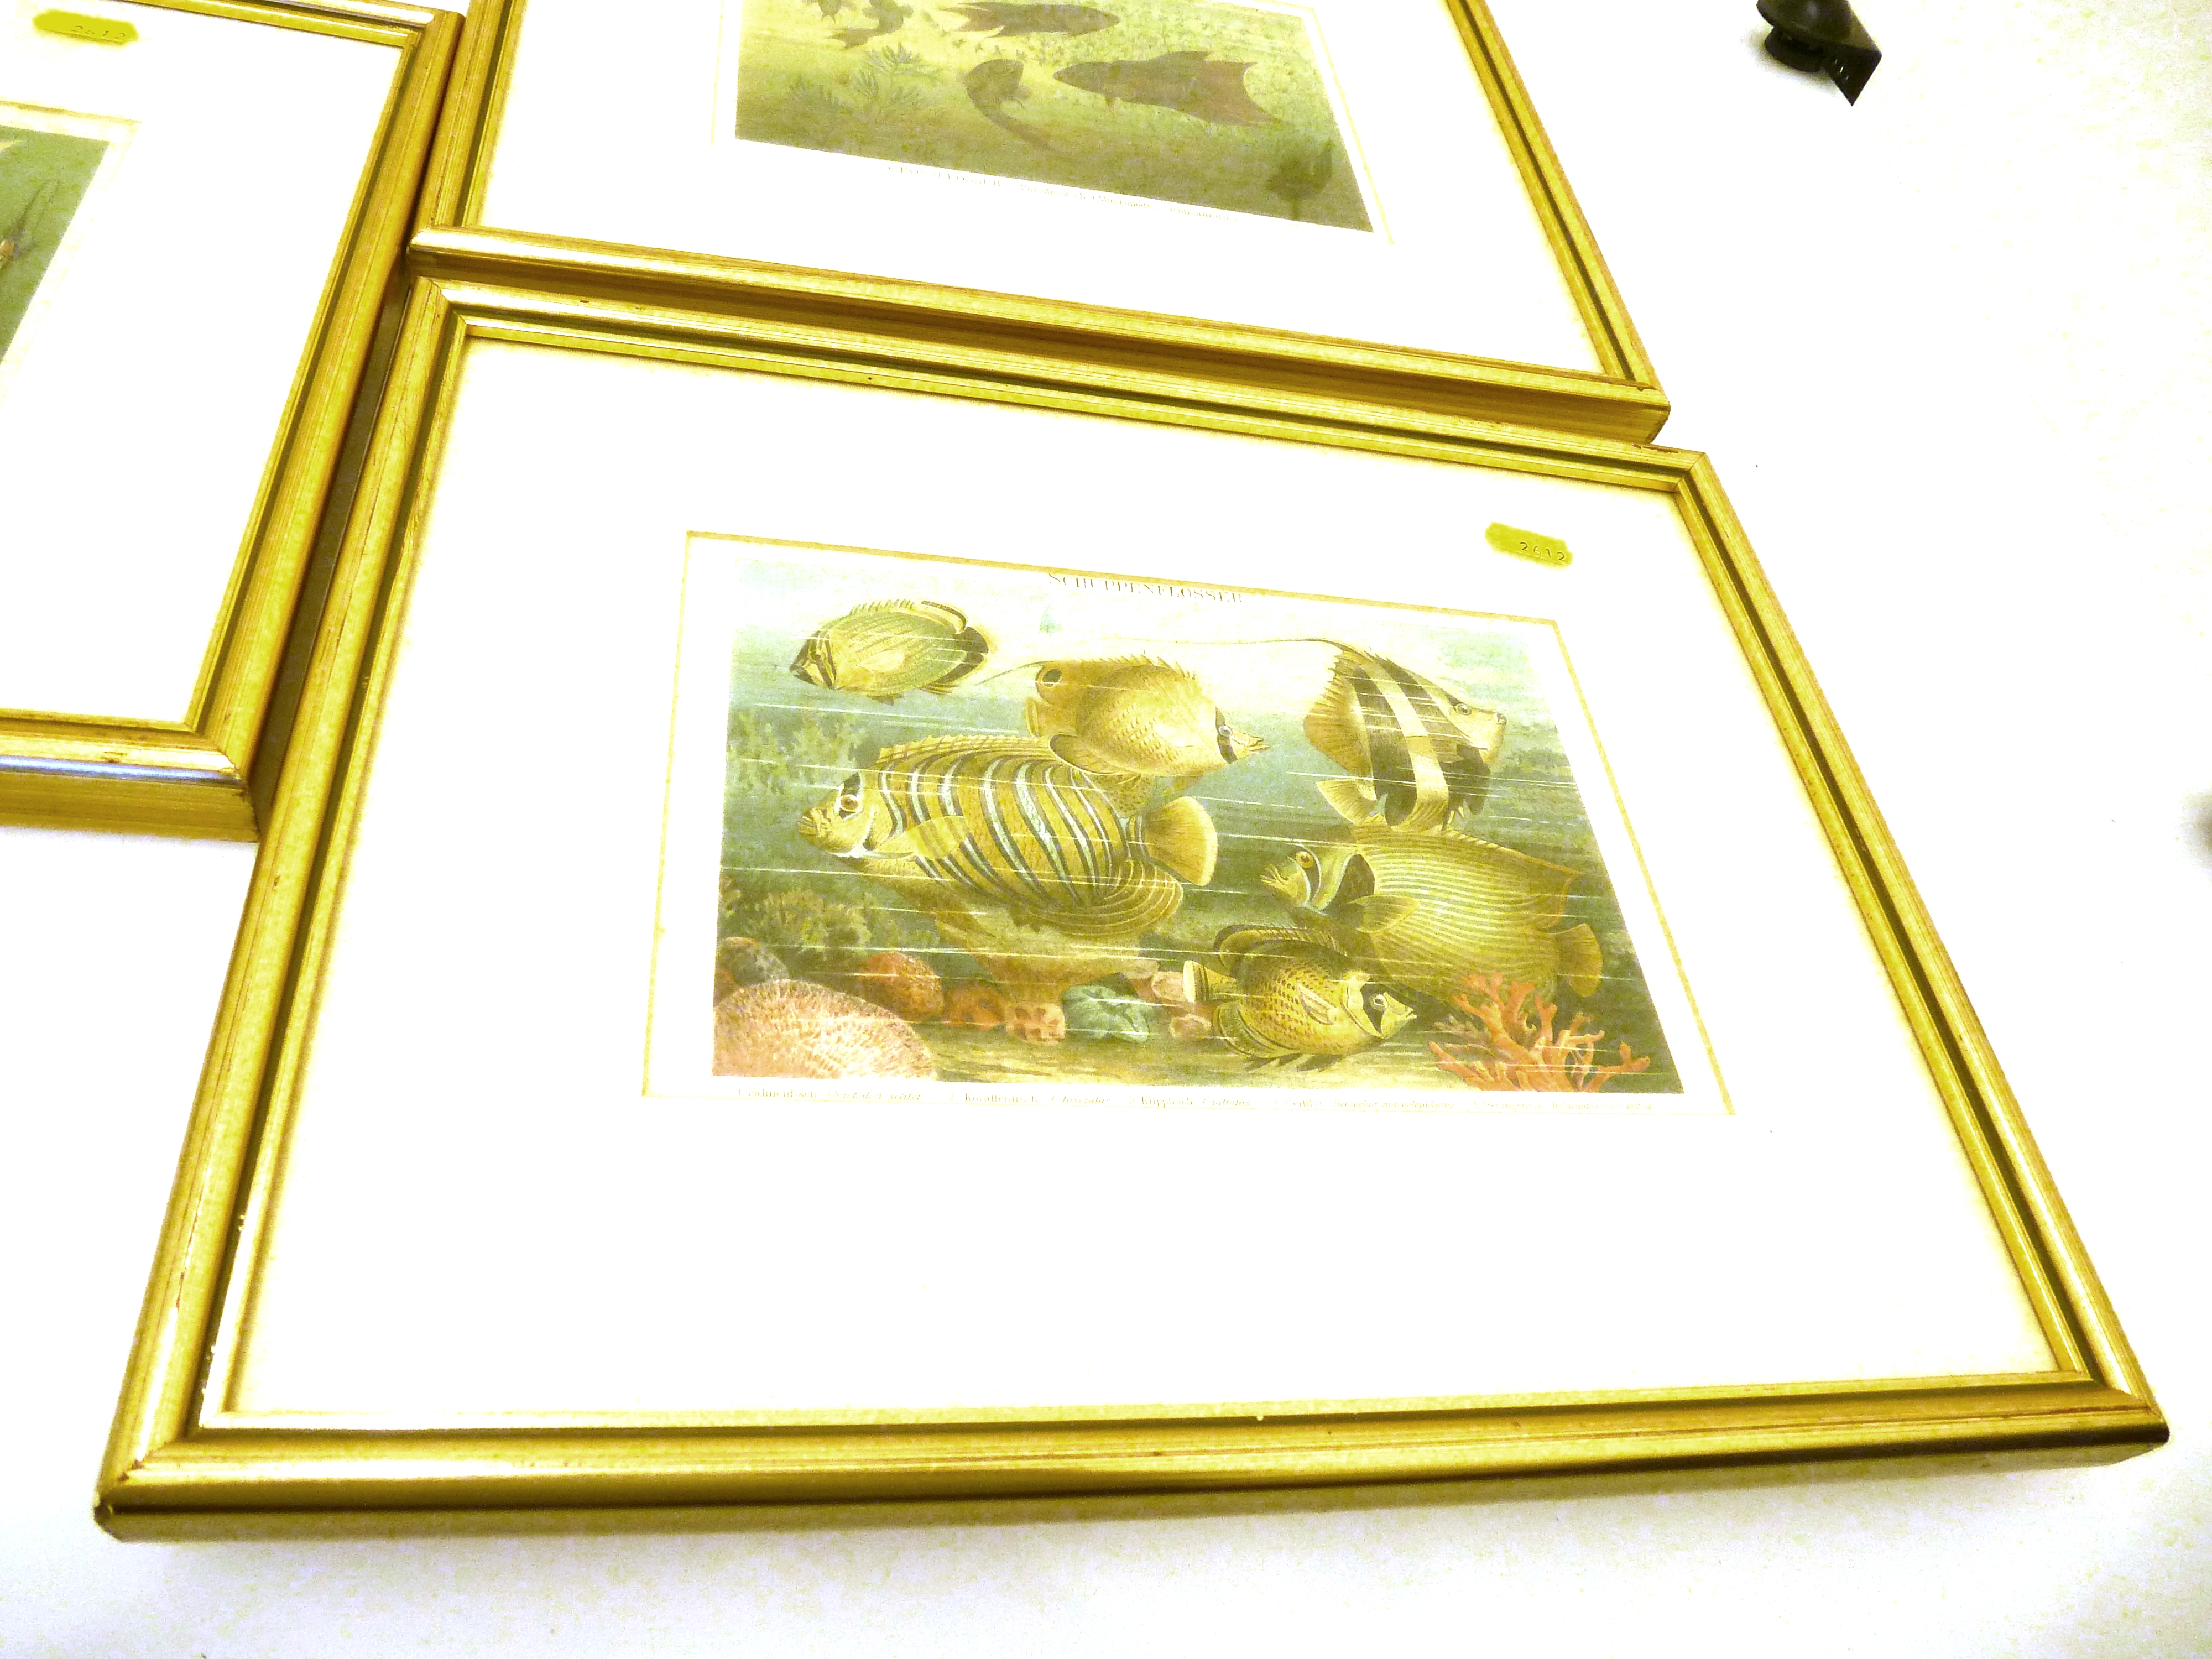 3 FRAMED 1896 GERMAN CHROMO LITHOGRAPHS DEPICTING MARINE LIFE APPROX 5.75" X 8.25" - Image 2 of 4